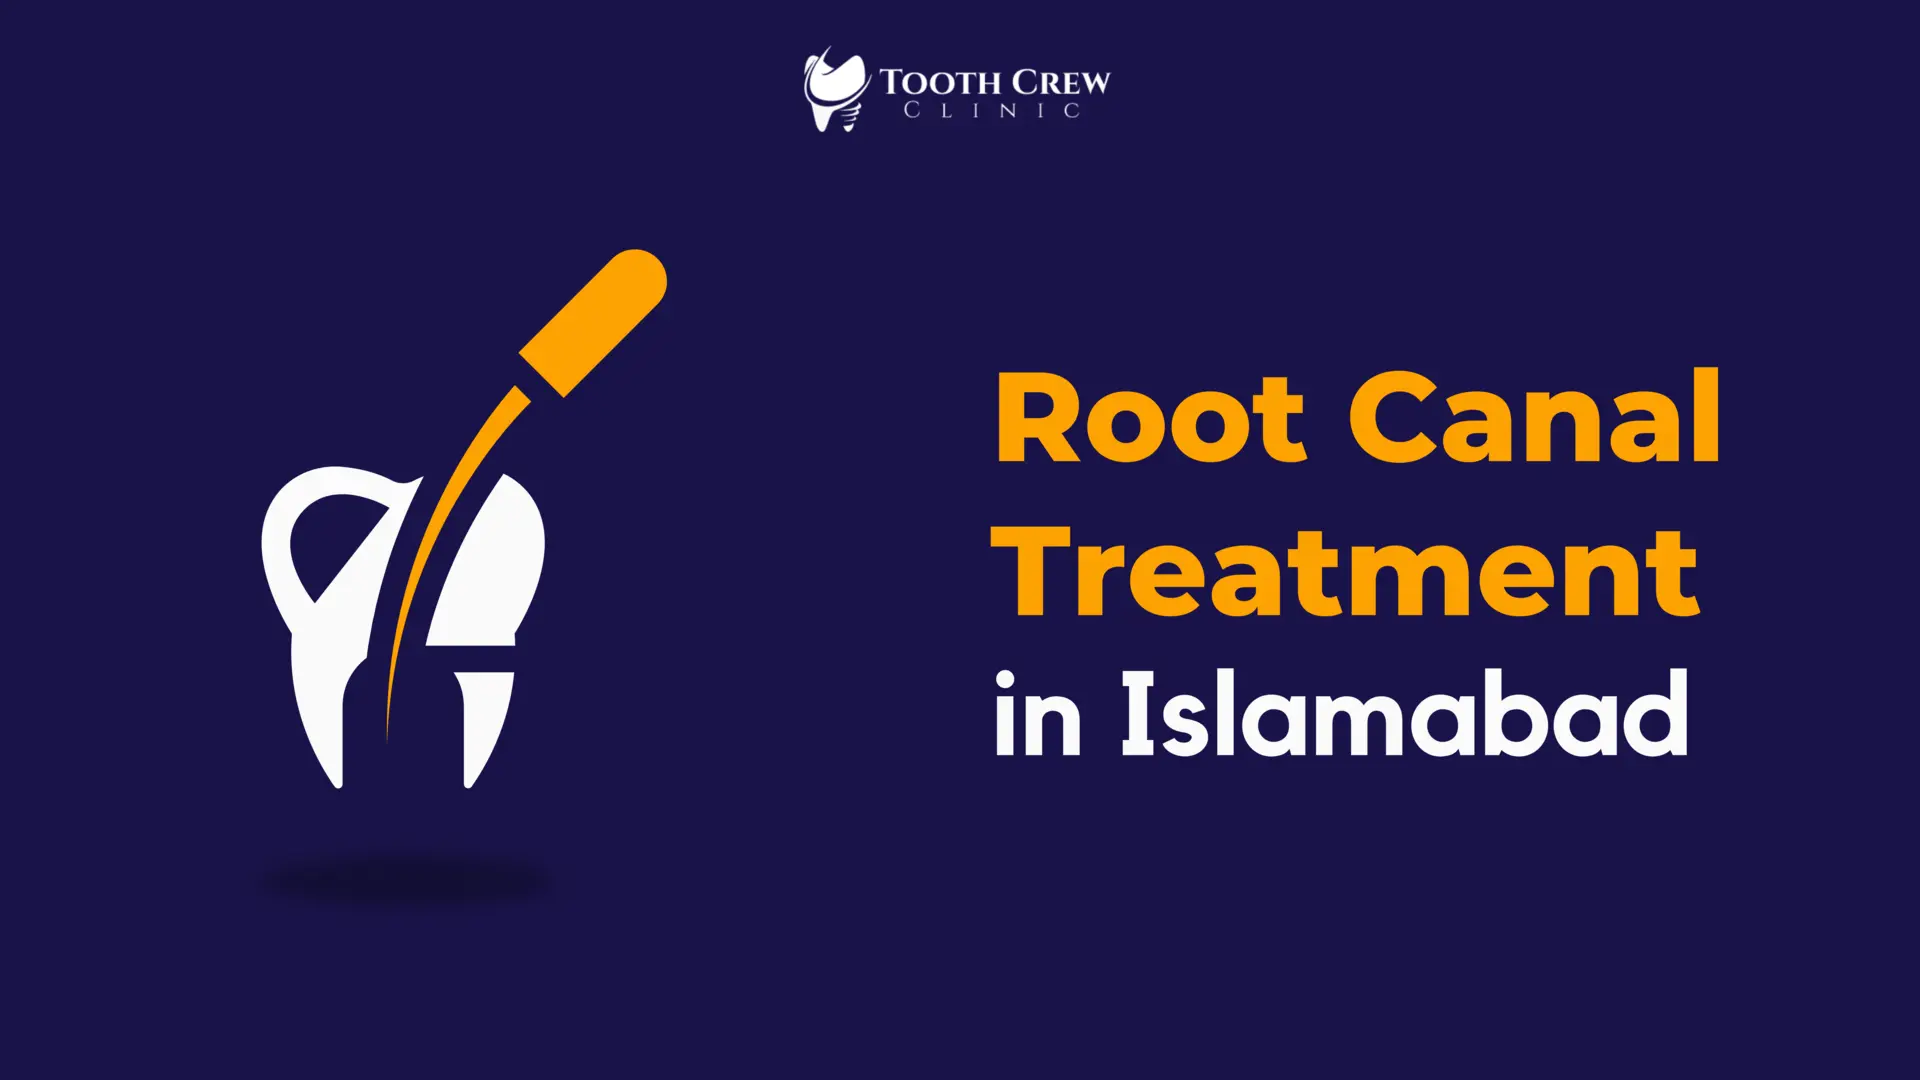 root canal treatment in Islamabad banner